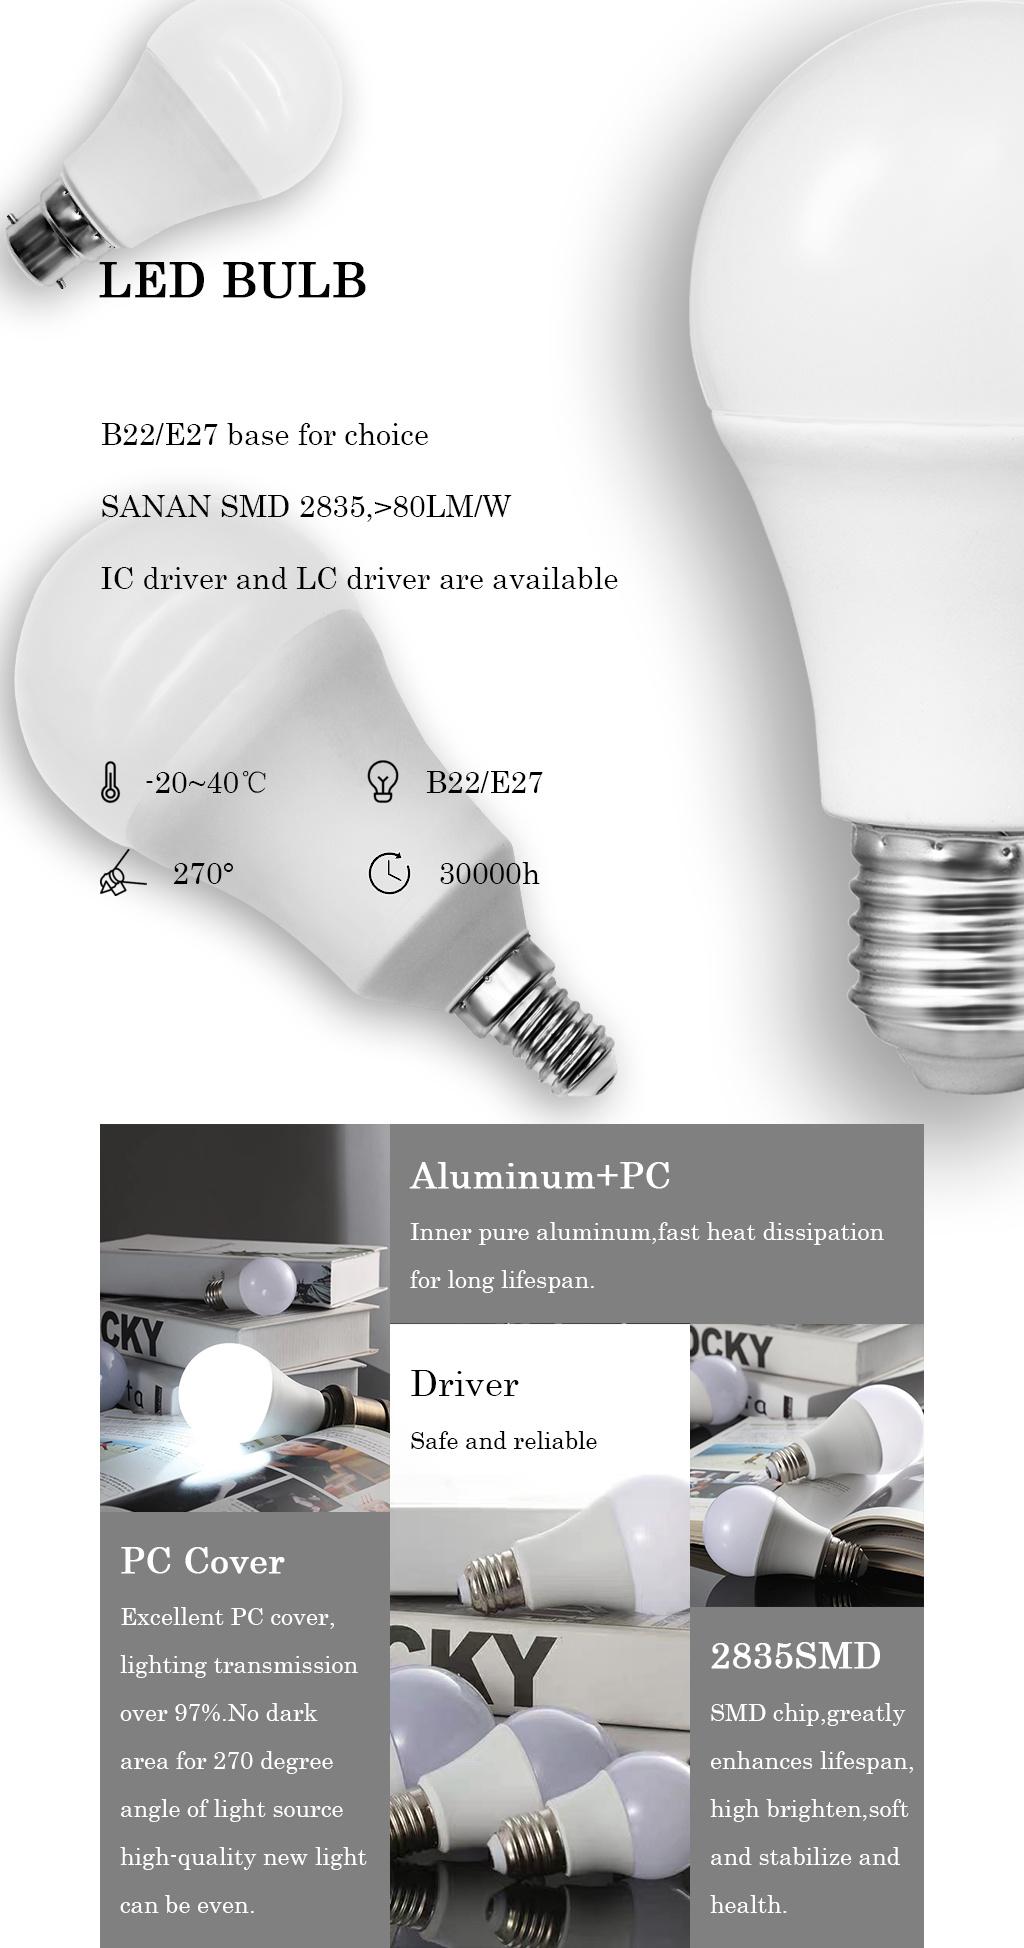 LED Bulb Lamp Light Manufacture From China Provide LED Bulb Energy Saving Lamp A60 5-12W E27 B22 for Indoor Lighting